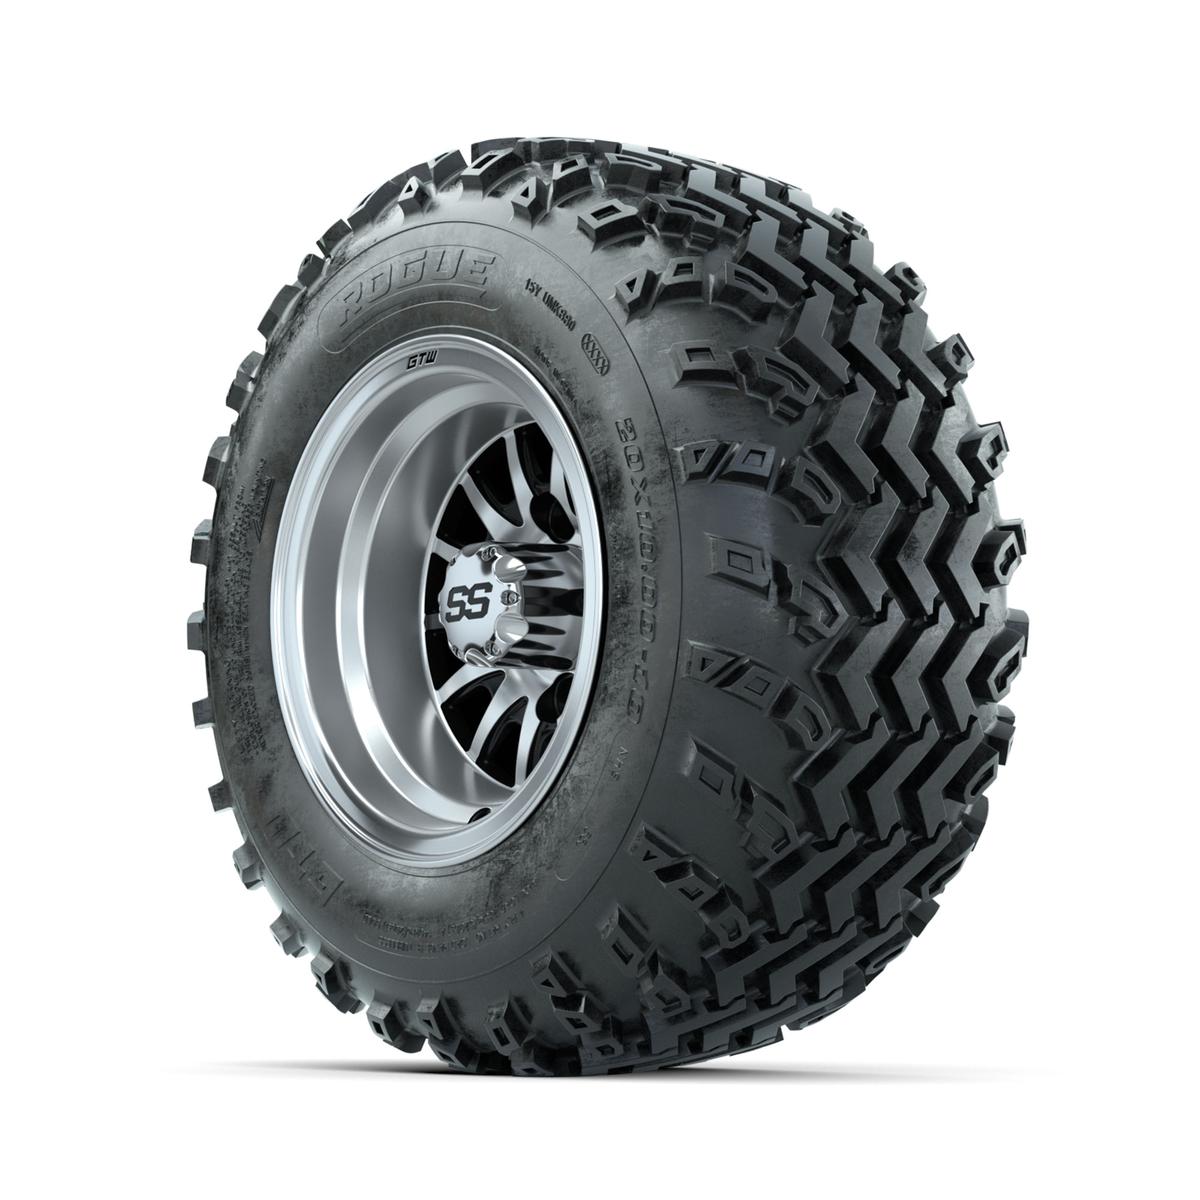 GTW Medusa Machined/Black 10 in Wheels with 20x10.00-10 Rogue All Terrain Tires – Full Set